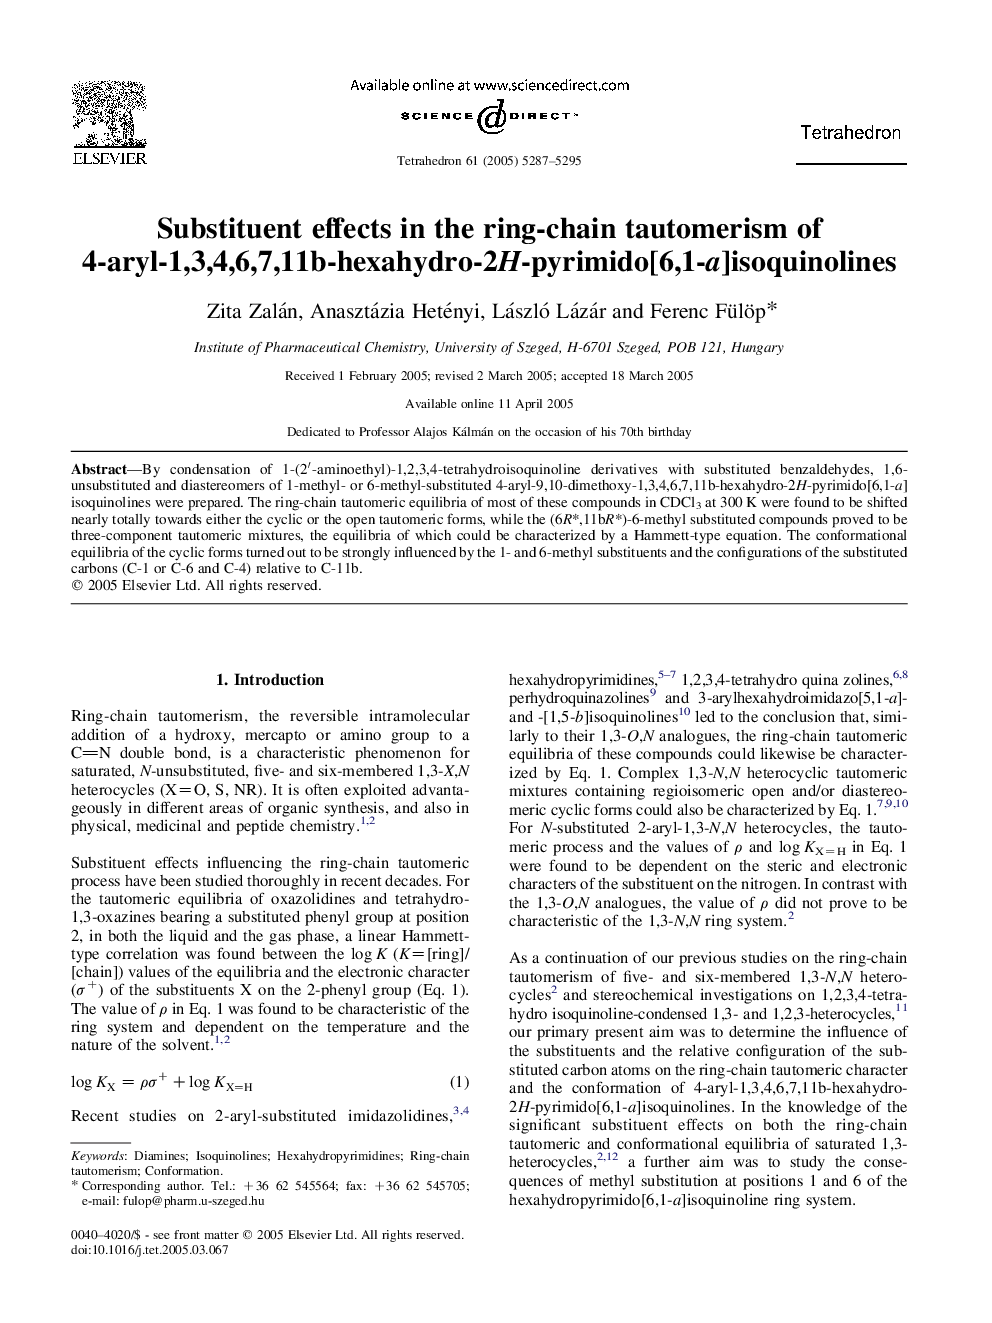 Substituent effects in the ring-chain tautomerism of 4-aryl-1,3,4,6,7,11b-hexahydro-2H-pyrimido[6,1-a]isoquinolines